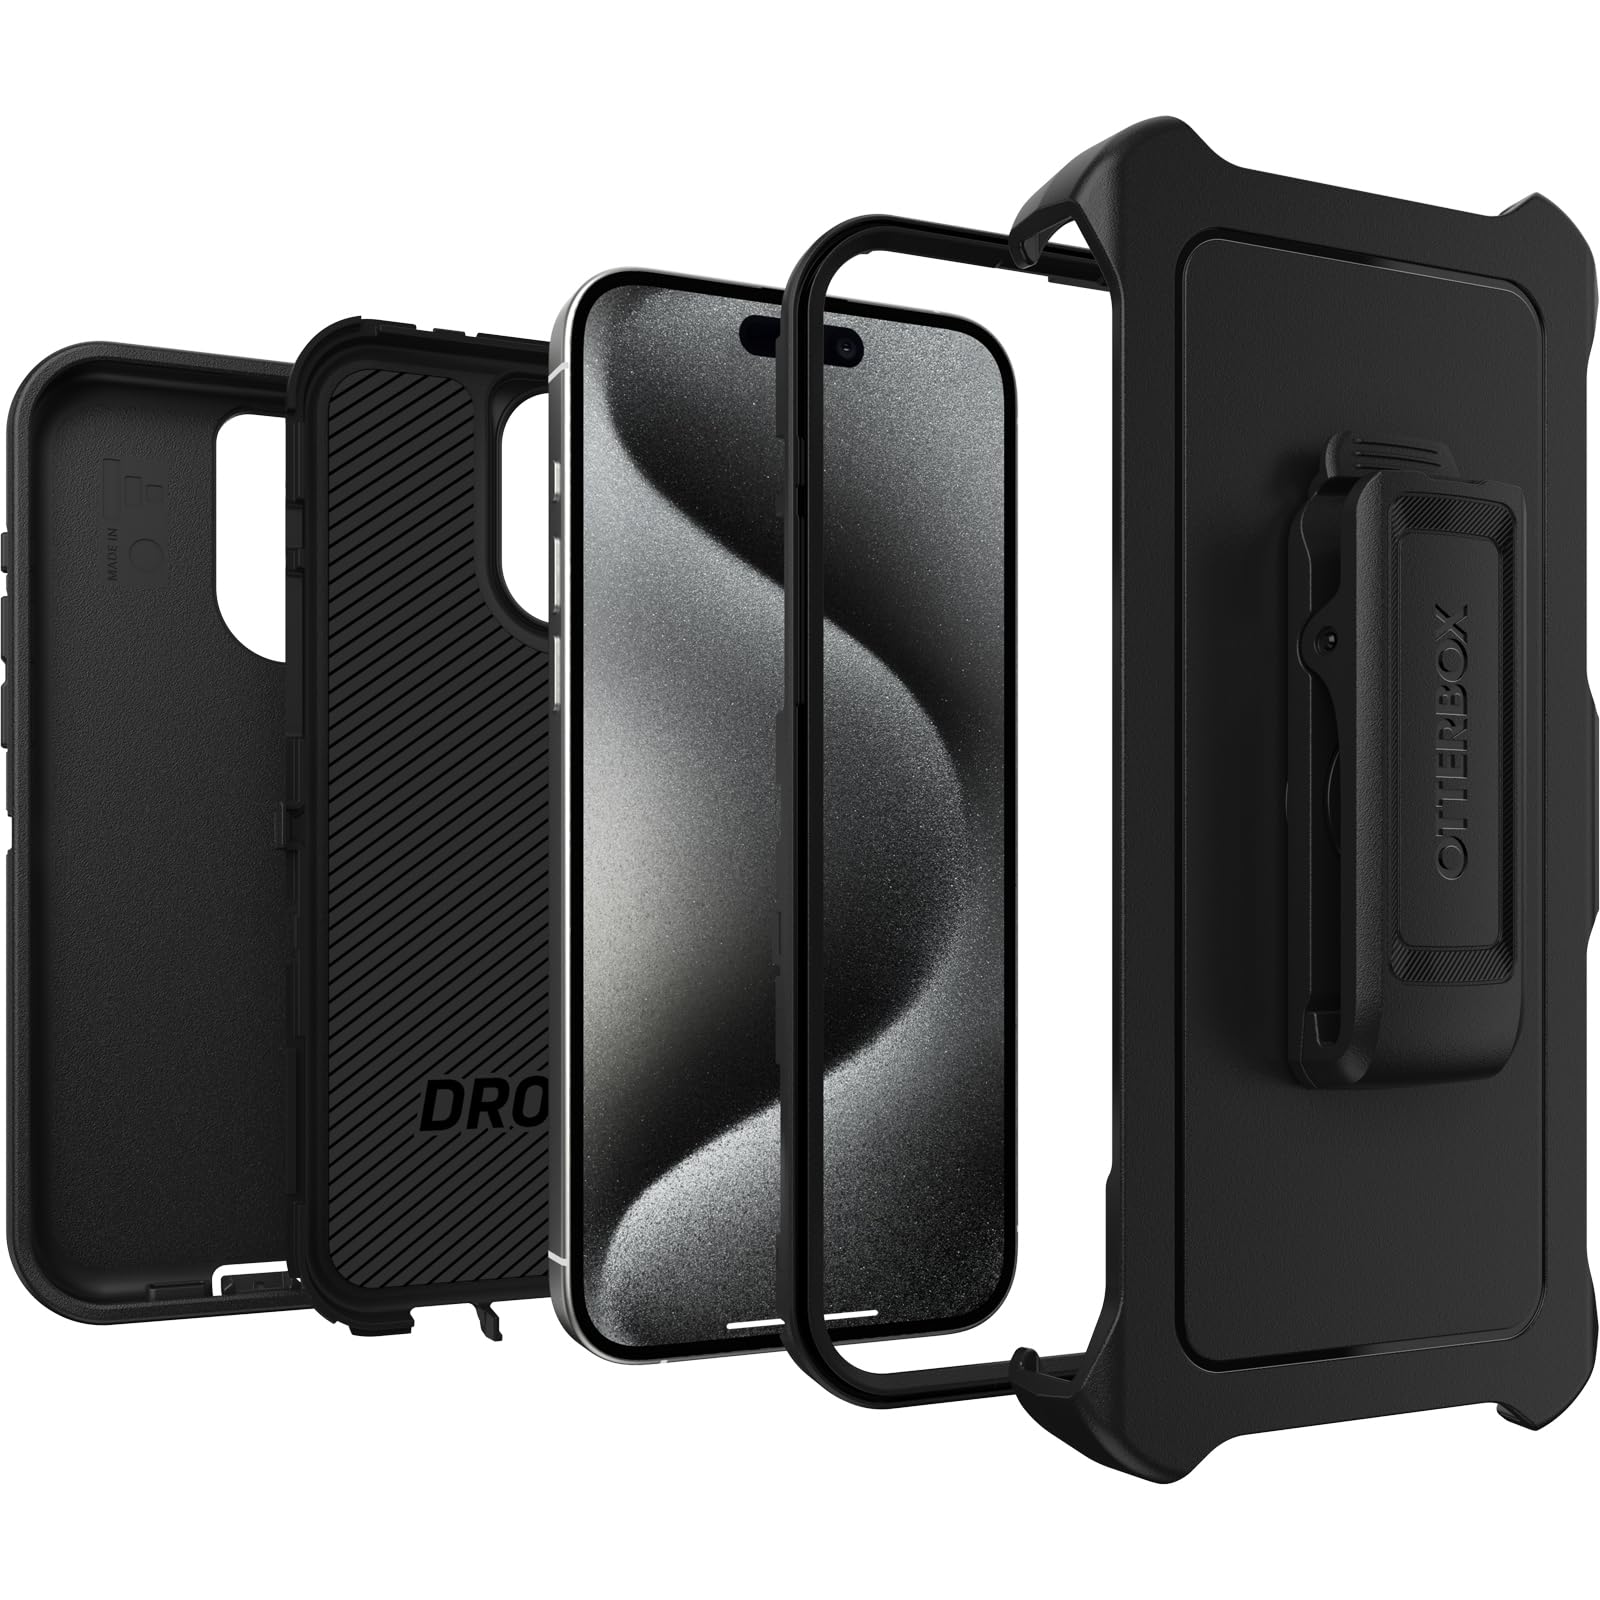 OtterBox iPhone 15 Pro MAX (Only) Defender Series Case - BLACK, screenless, rugged & durable, with port protection, includes holster clip kickstand (ships in polybag, ideal for business customers)